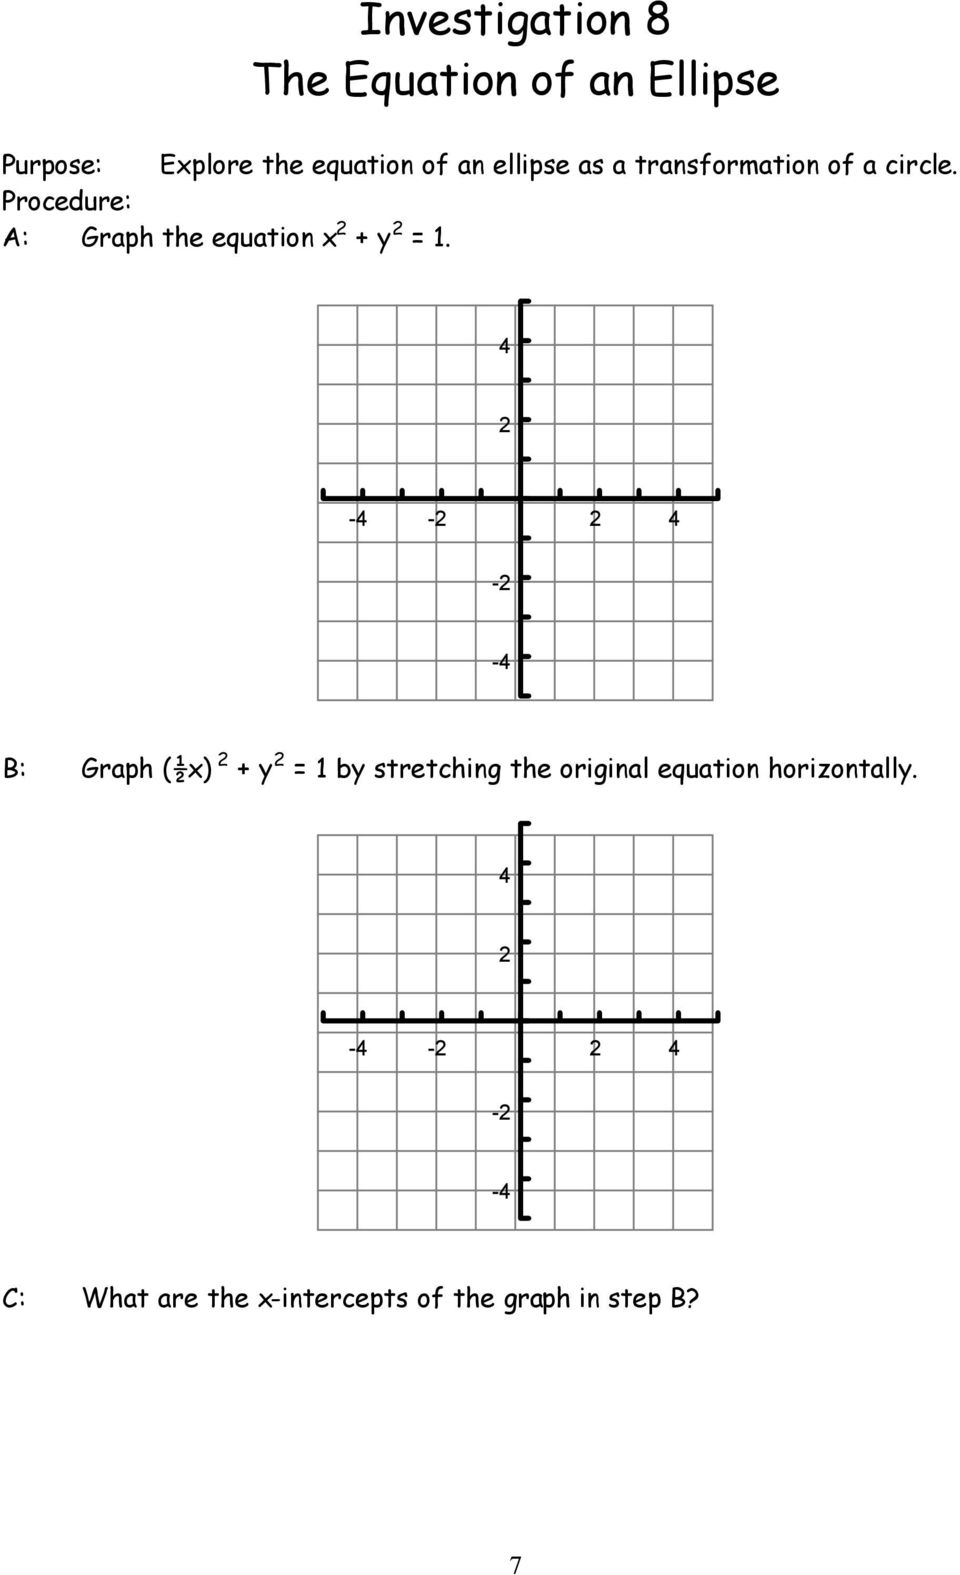 Procedure: A: Graph the equation x + y = 1.